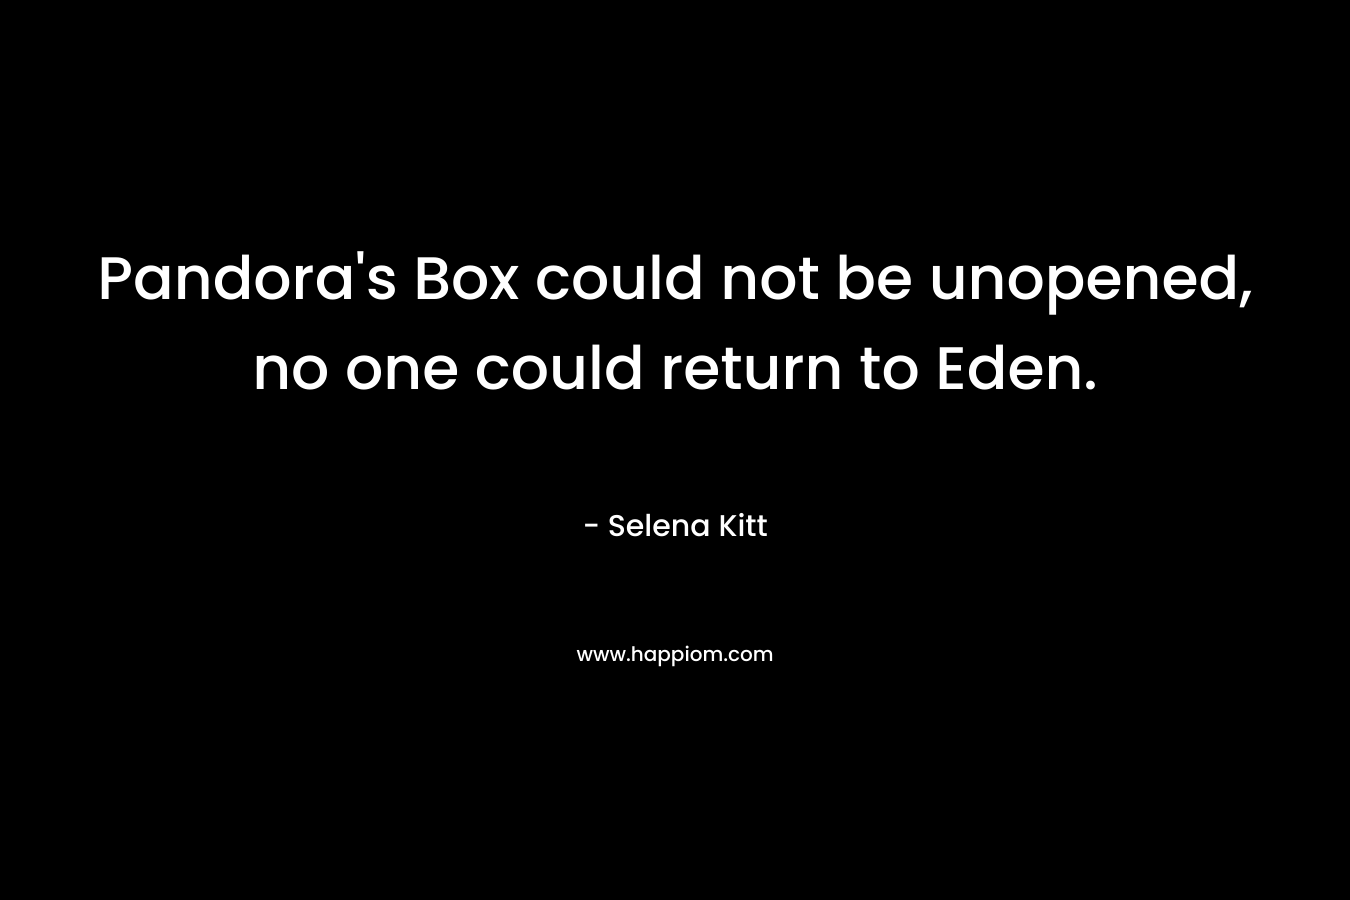 Pandora’s Box could not be unopened, no one could return to Eden. – Selena Kitt